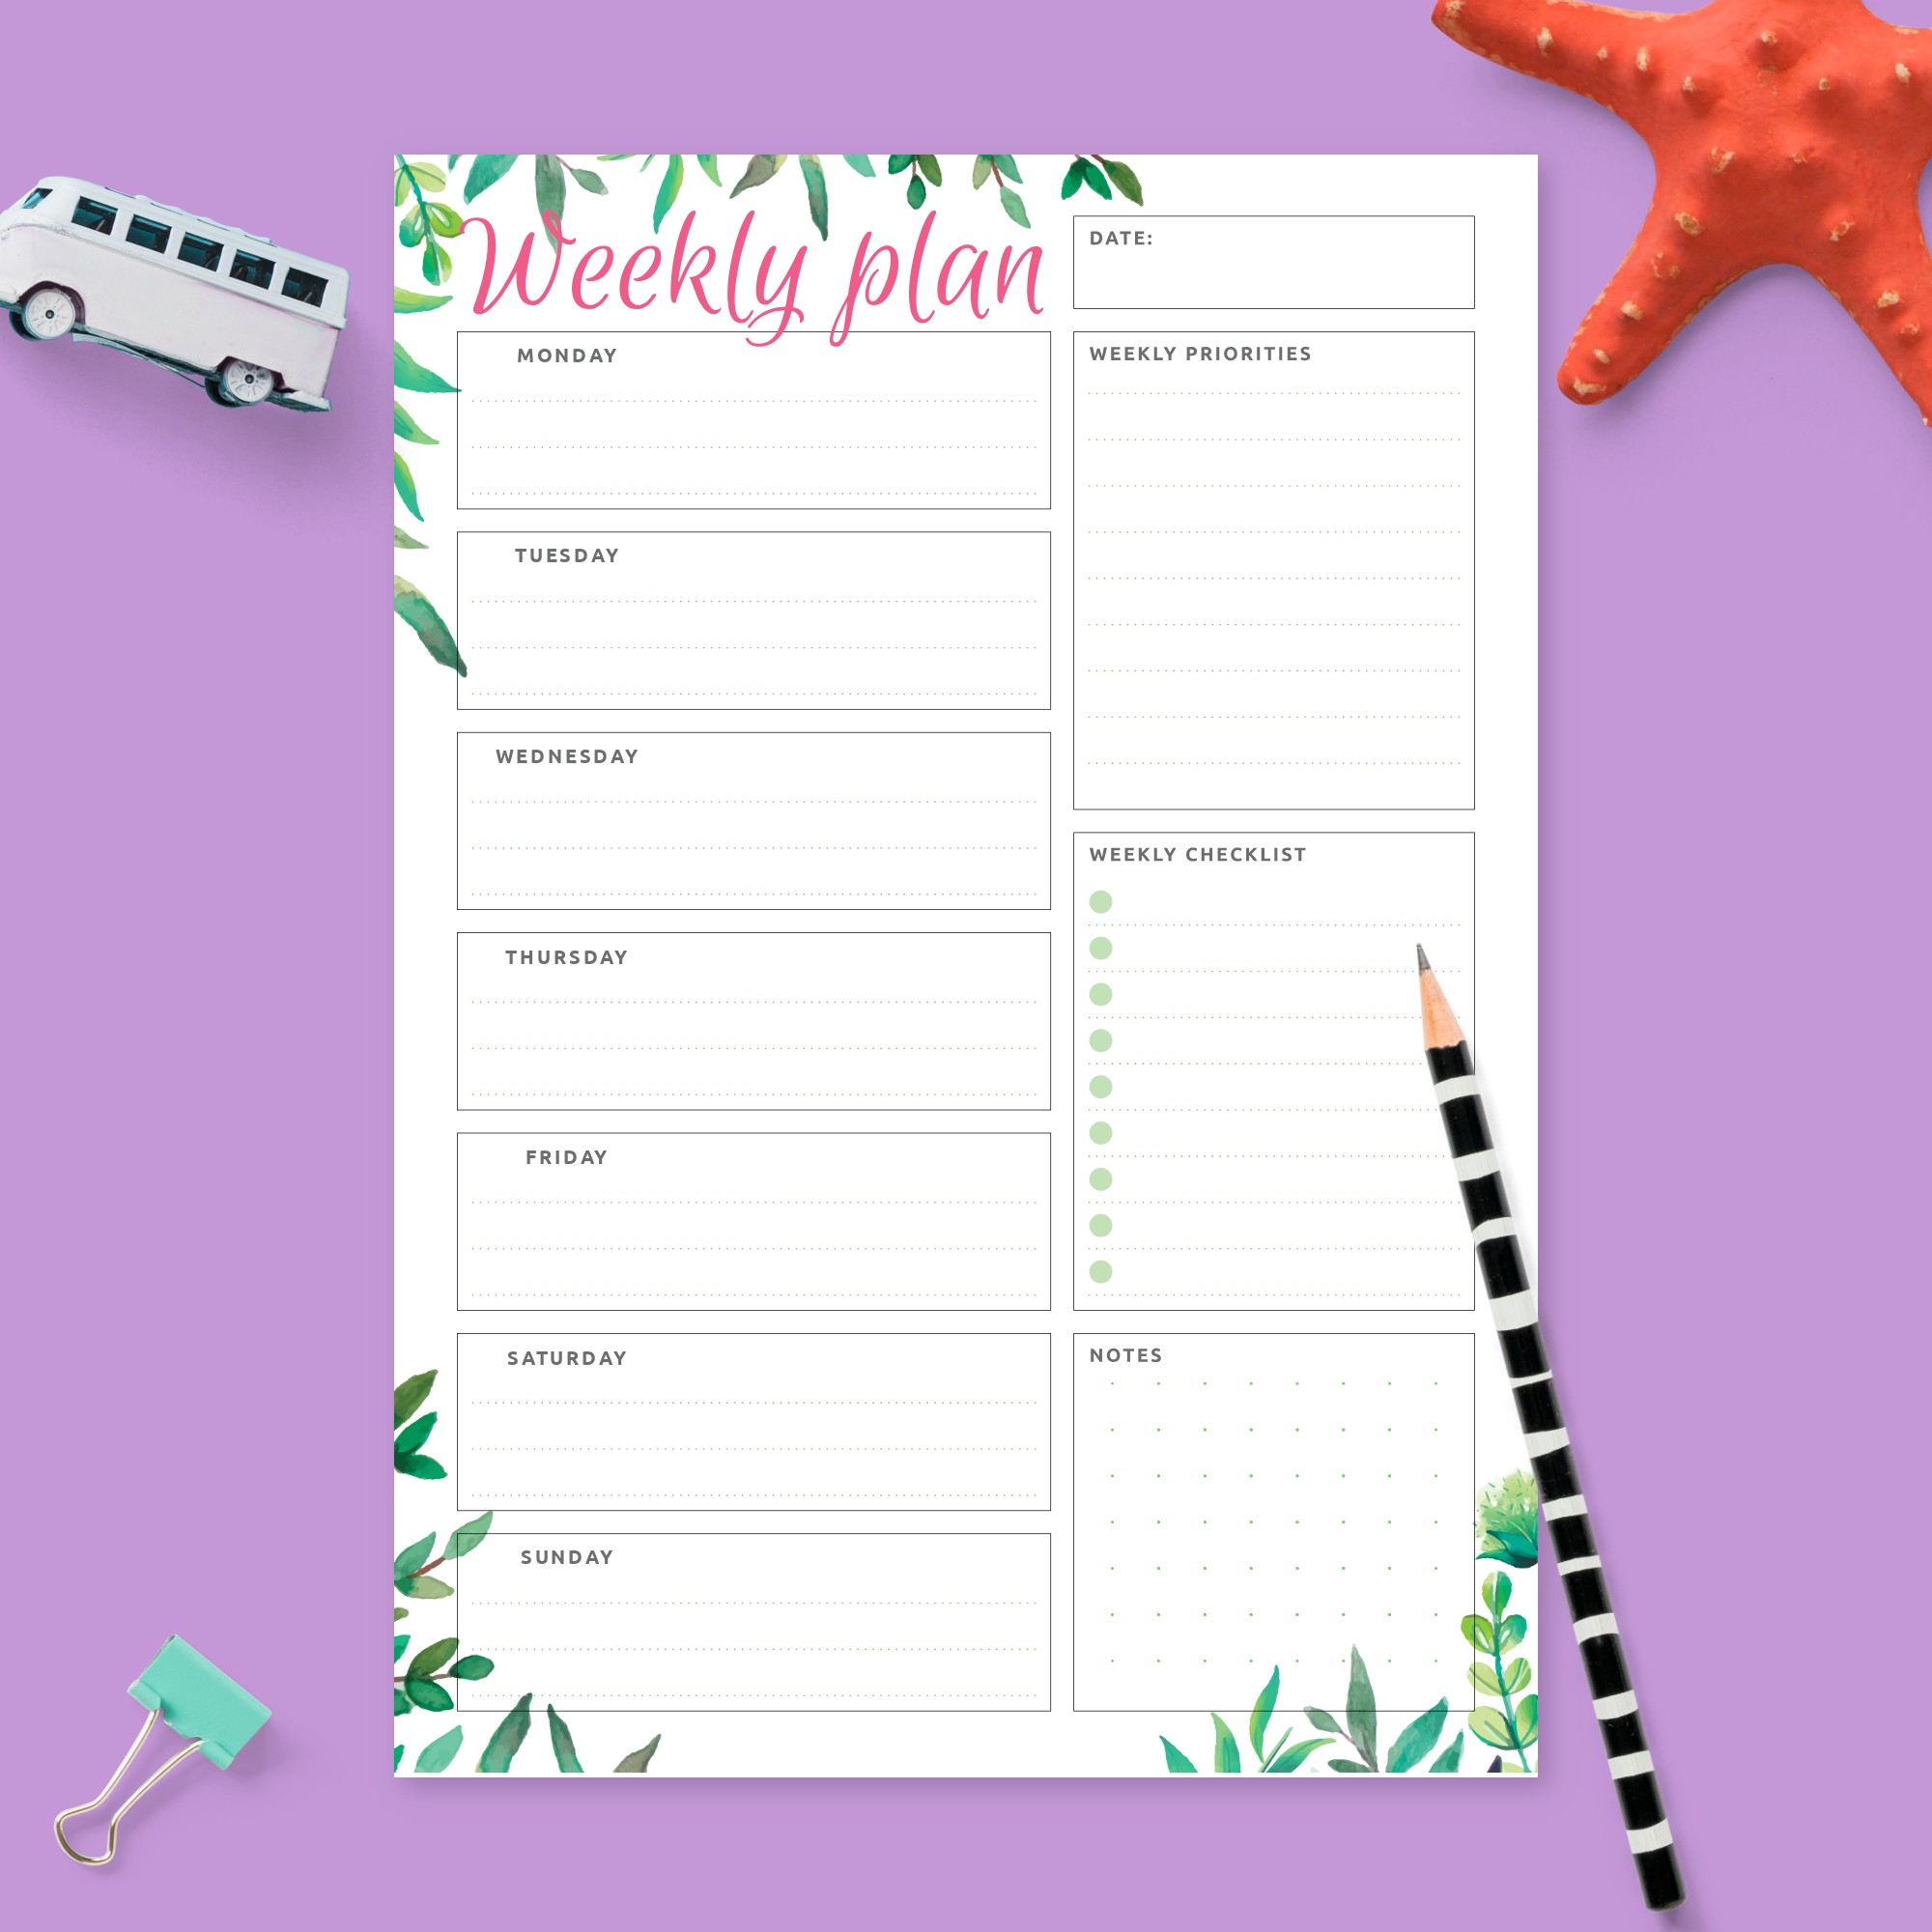 Week at a Glance Priorities and Checklist Template - Printable PDF